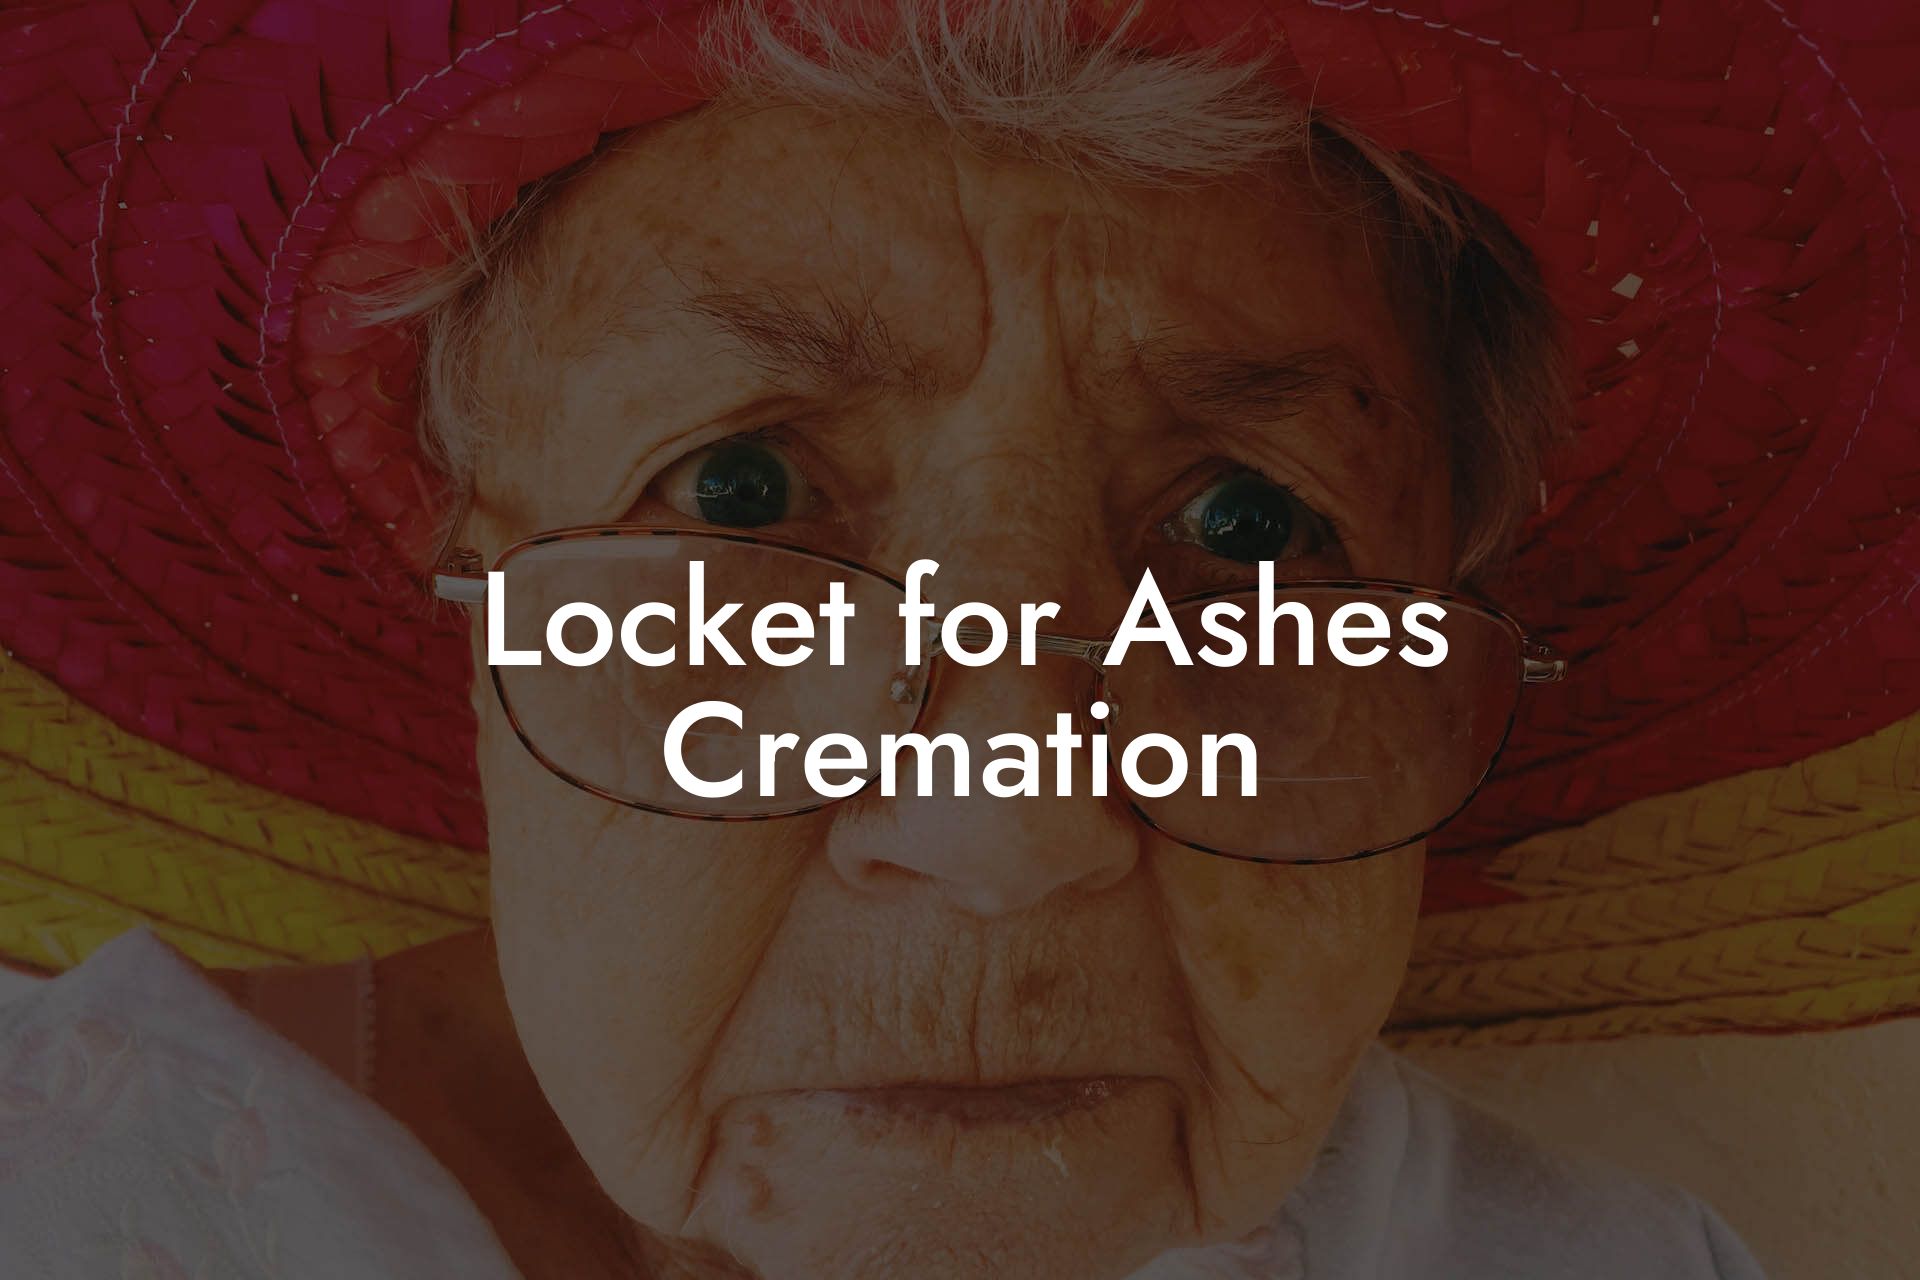 Locket for Ashes Cremation